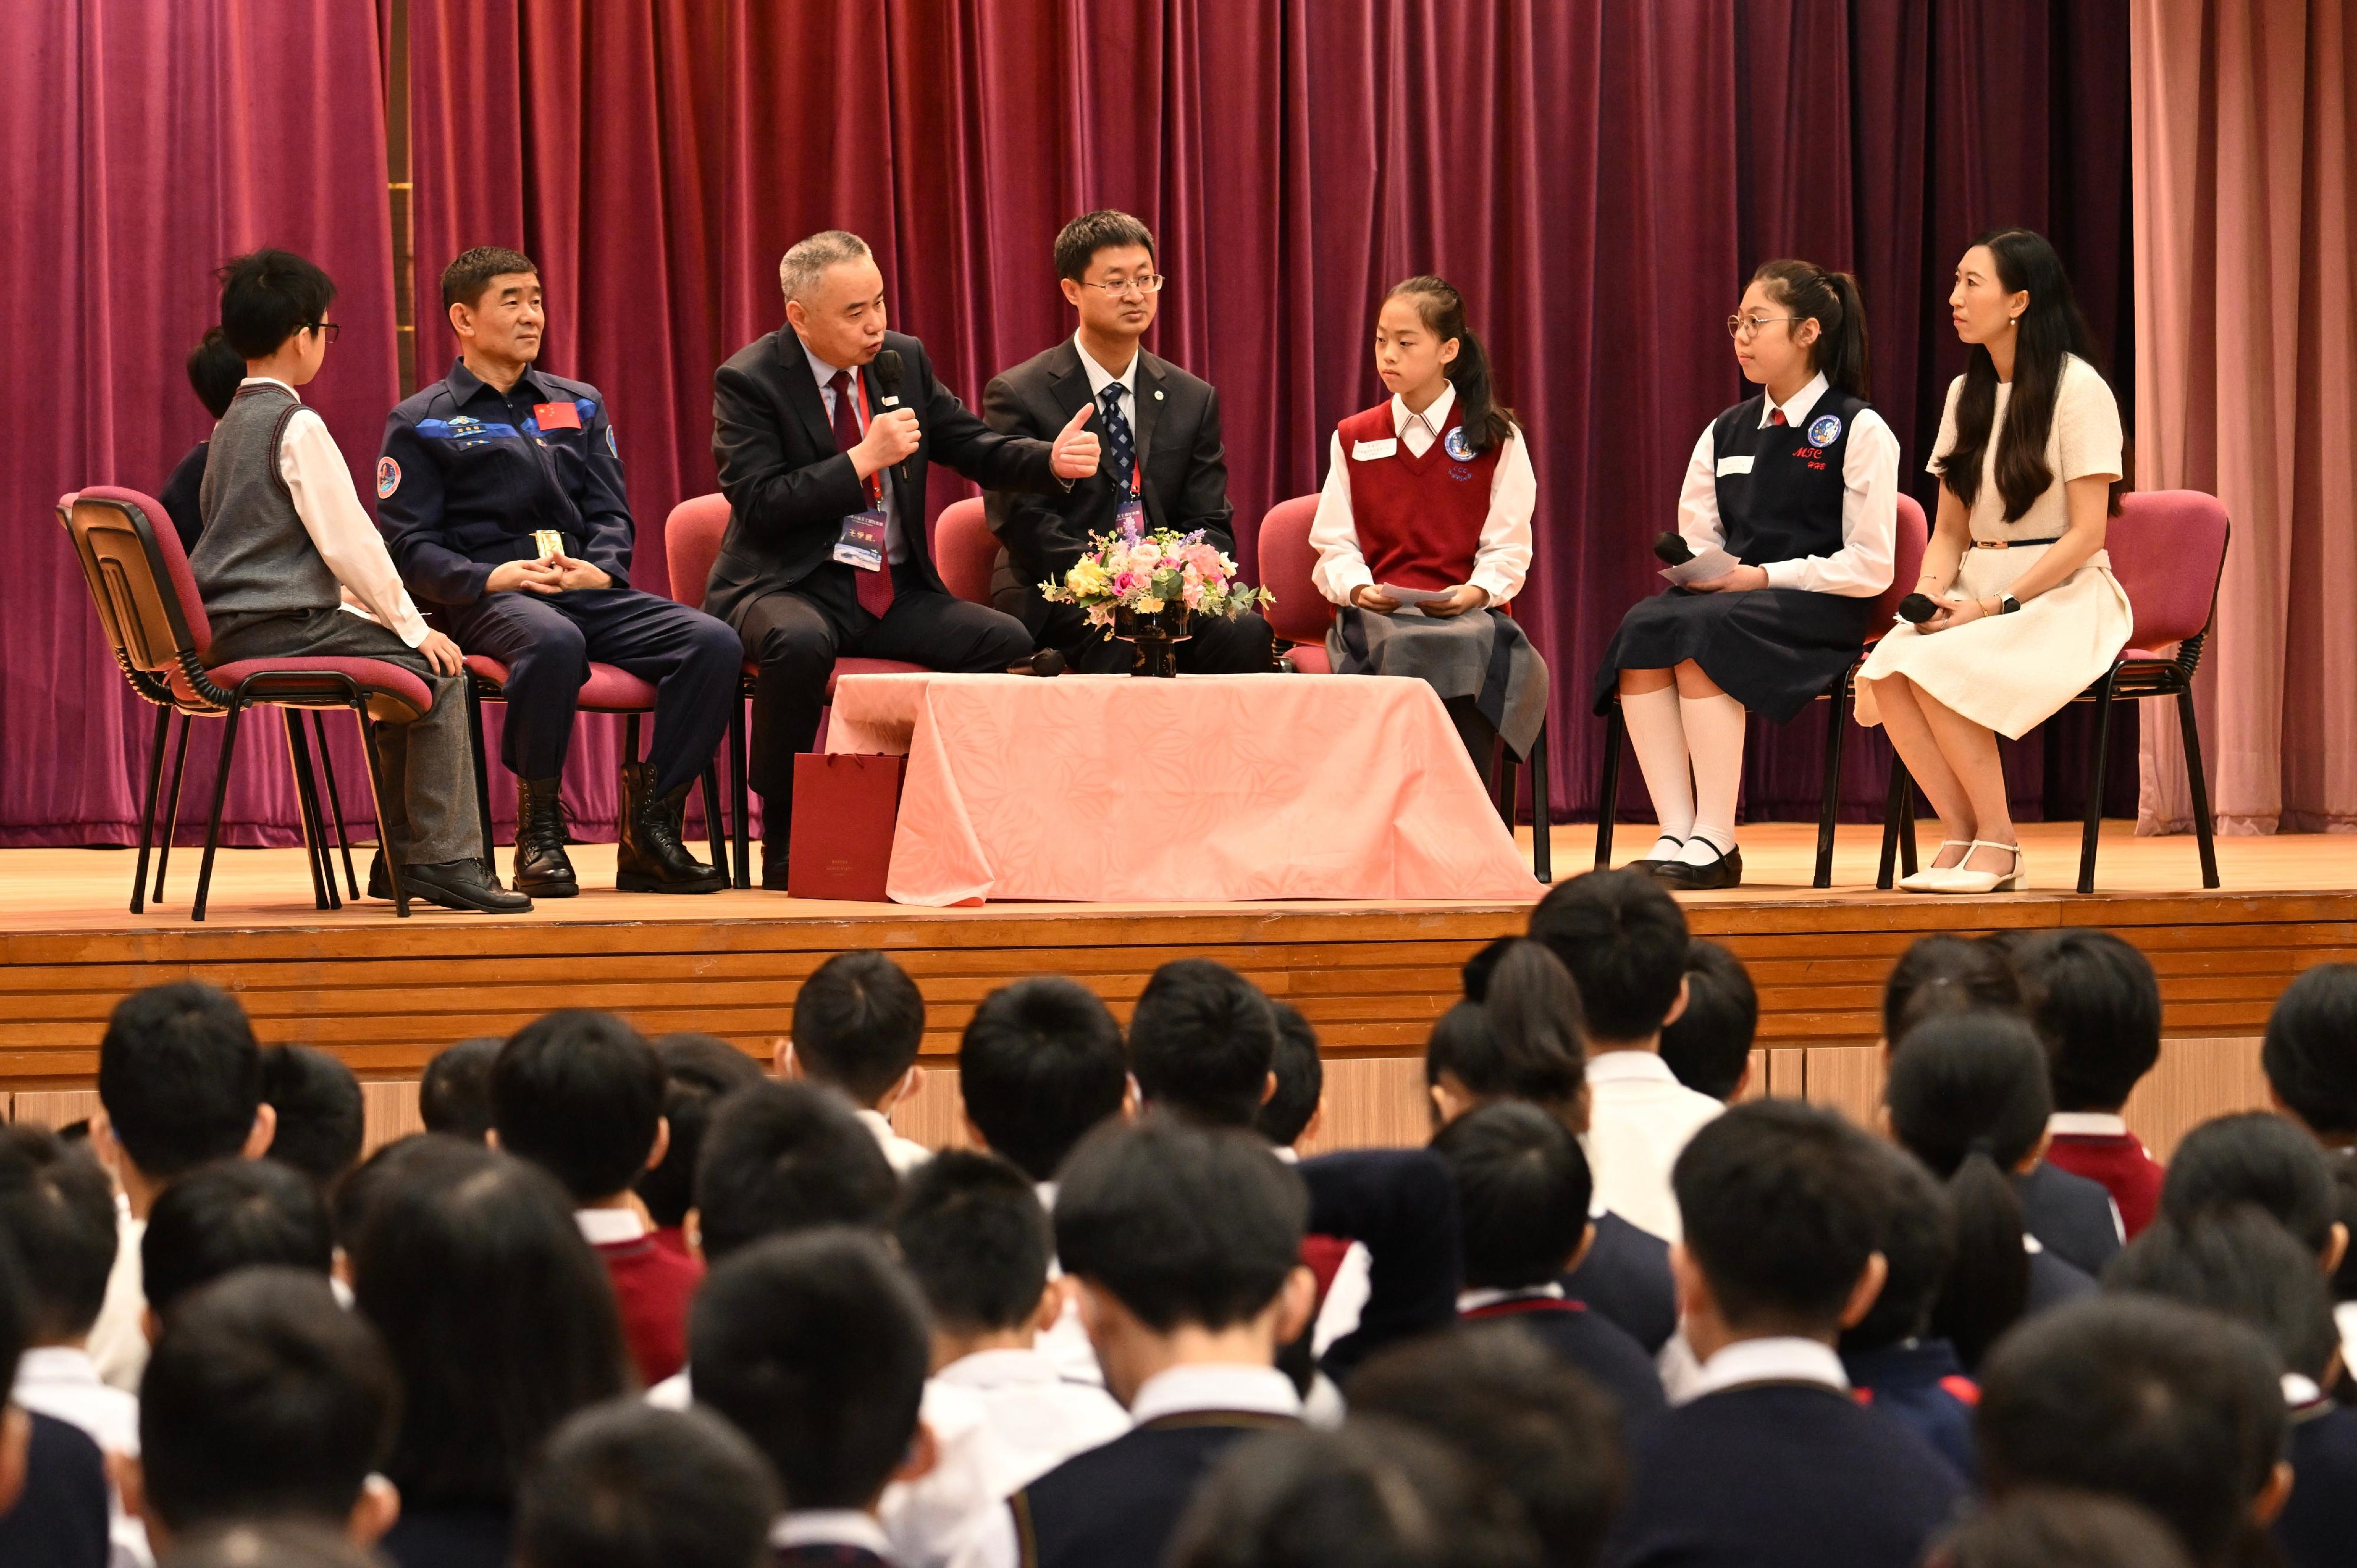 The China Manned Space delegation continued their visit in Hong Kong today (November 29). Photo shows (from second left) Shenzhou-12 astronaut Mr Liu Boming, and delegation members Mr Wang Xuewu and Mr Zhong Hongen, attending a dialogue session with students at Ma Tau Chung Government Primary School (Hung Hom Bay).